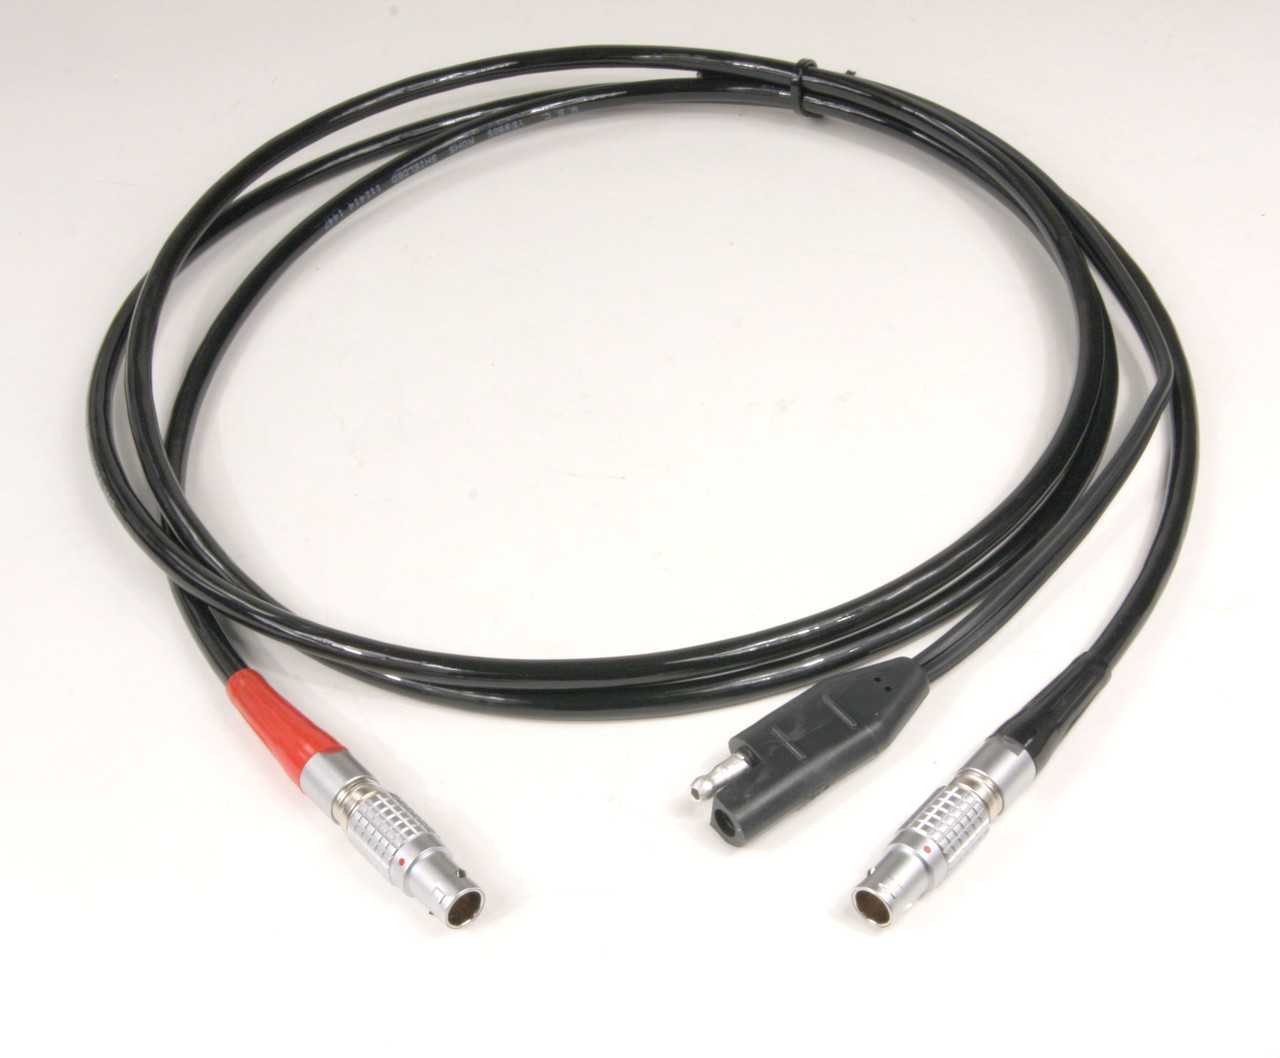 265018-L  GeoMax Zenith 35 Pro and Zenith 60 to Trimble TDL,ADL,HPB,PDL Radio Data Cable with Power